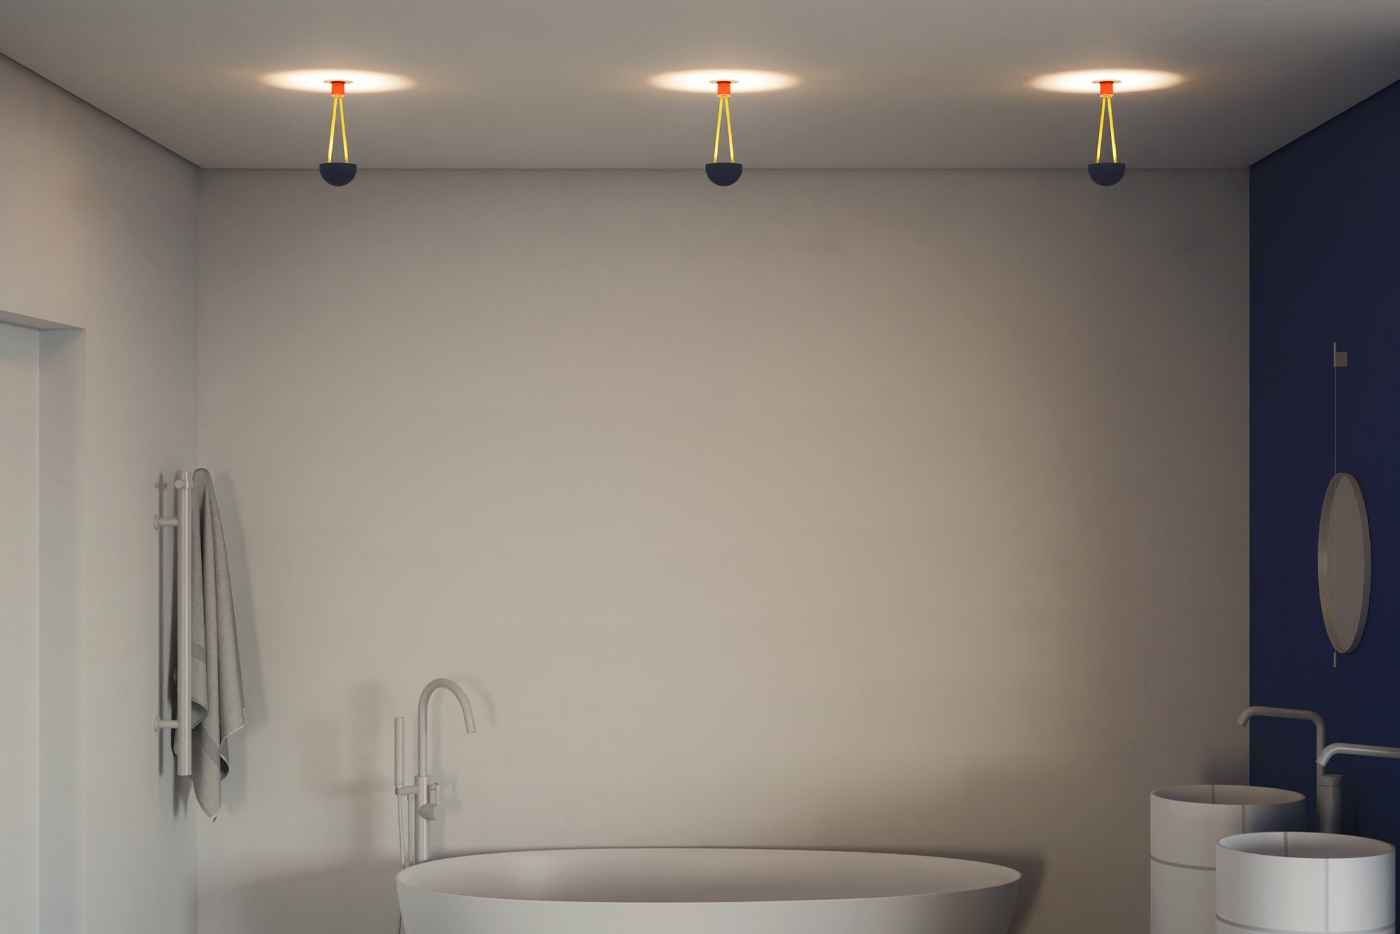 System 65 for recessed lamps